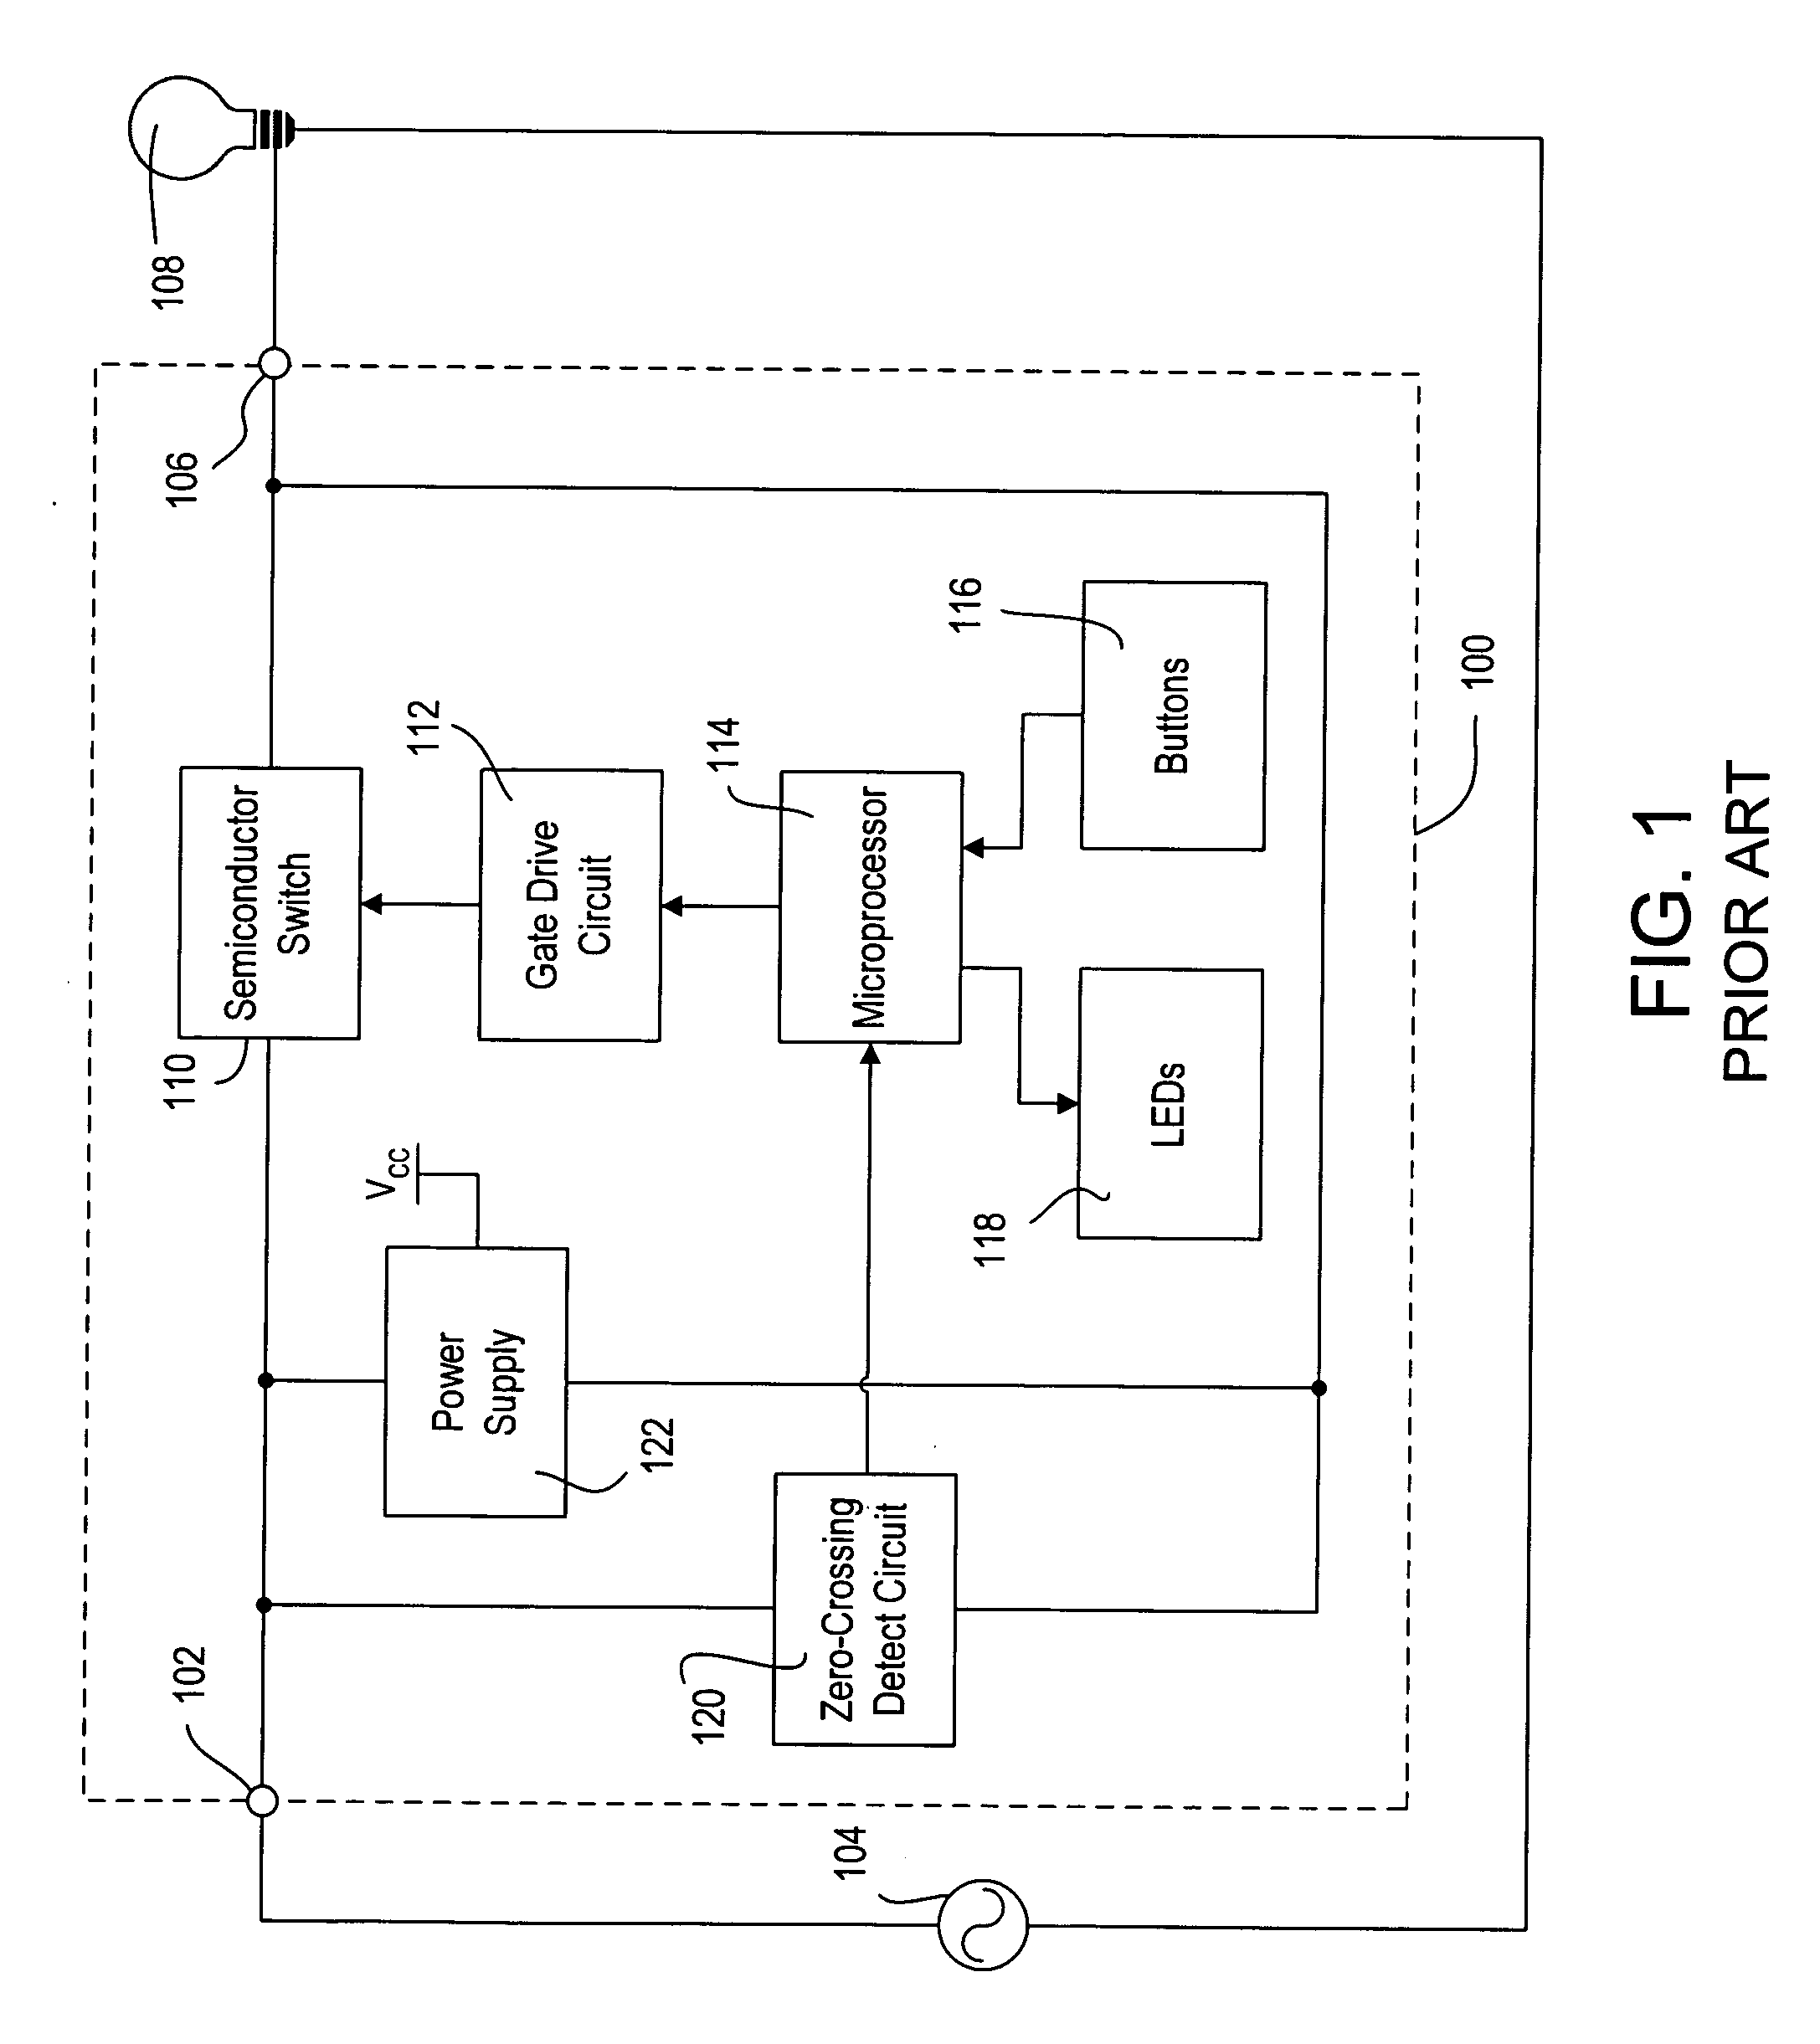 Dimmer having a microprocessor-controlled power supply